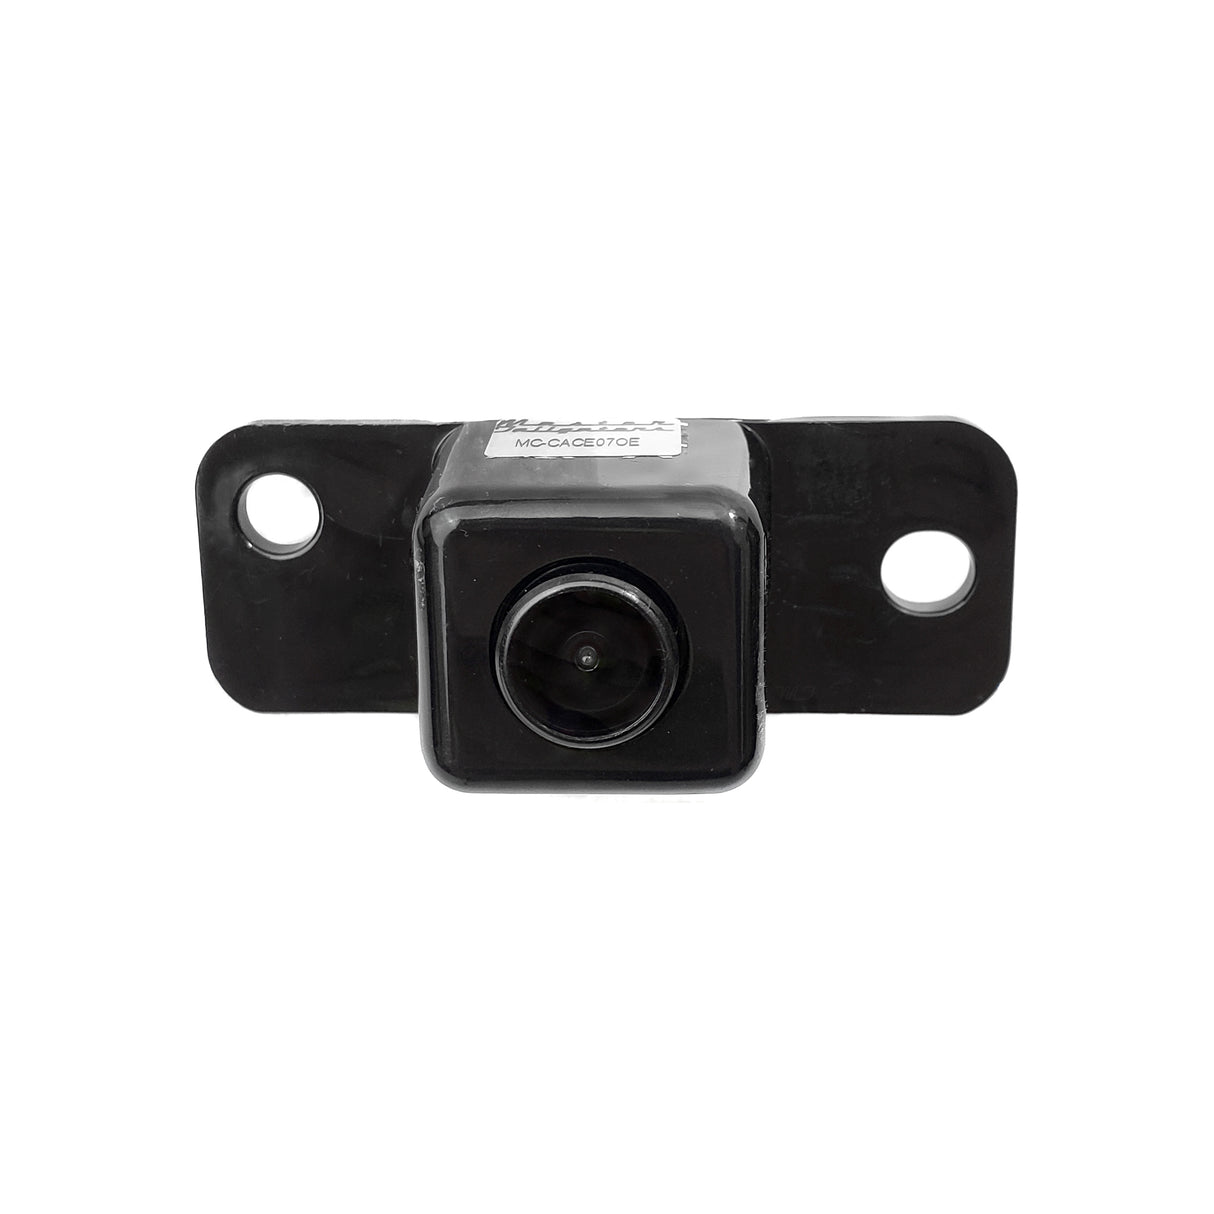 Chevrolet Avalanche / Cadillac Escalade EXT (2007-2008) OEM Replacement Backup Camera OE Part # 15862575